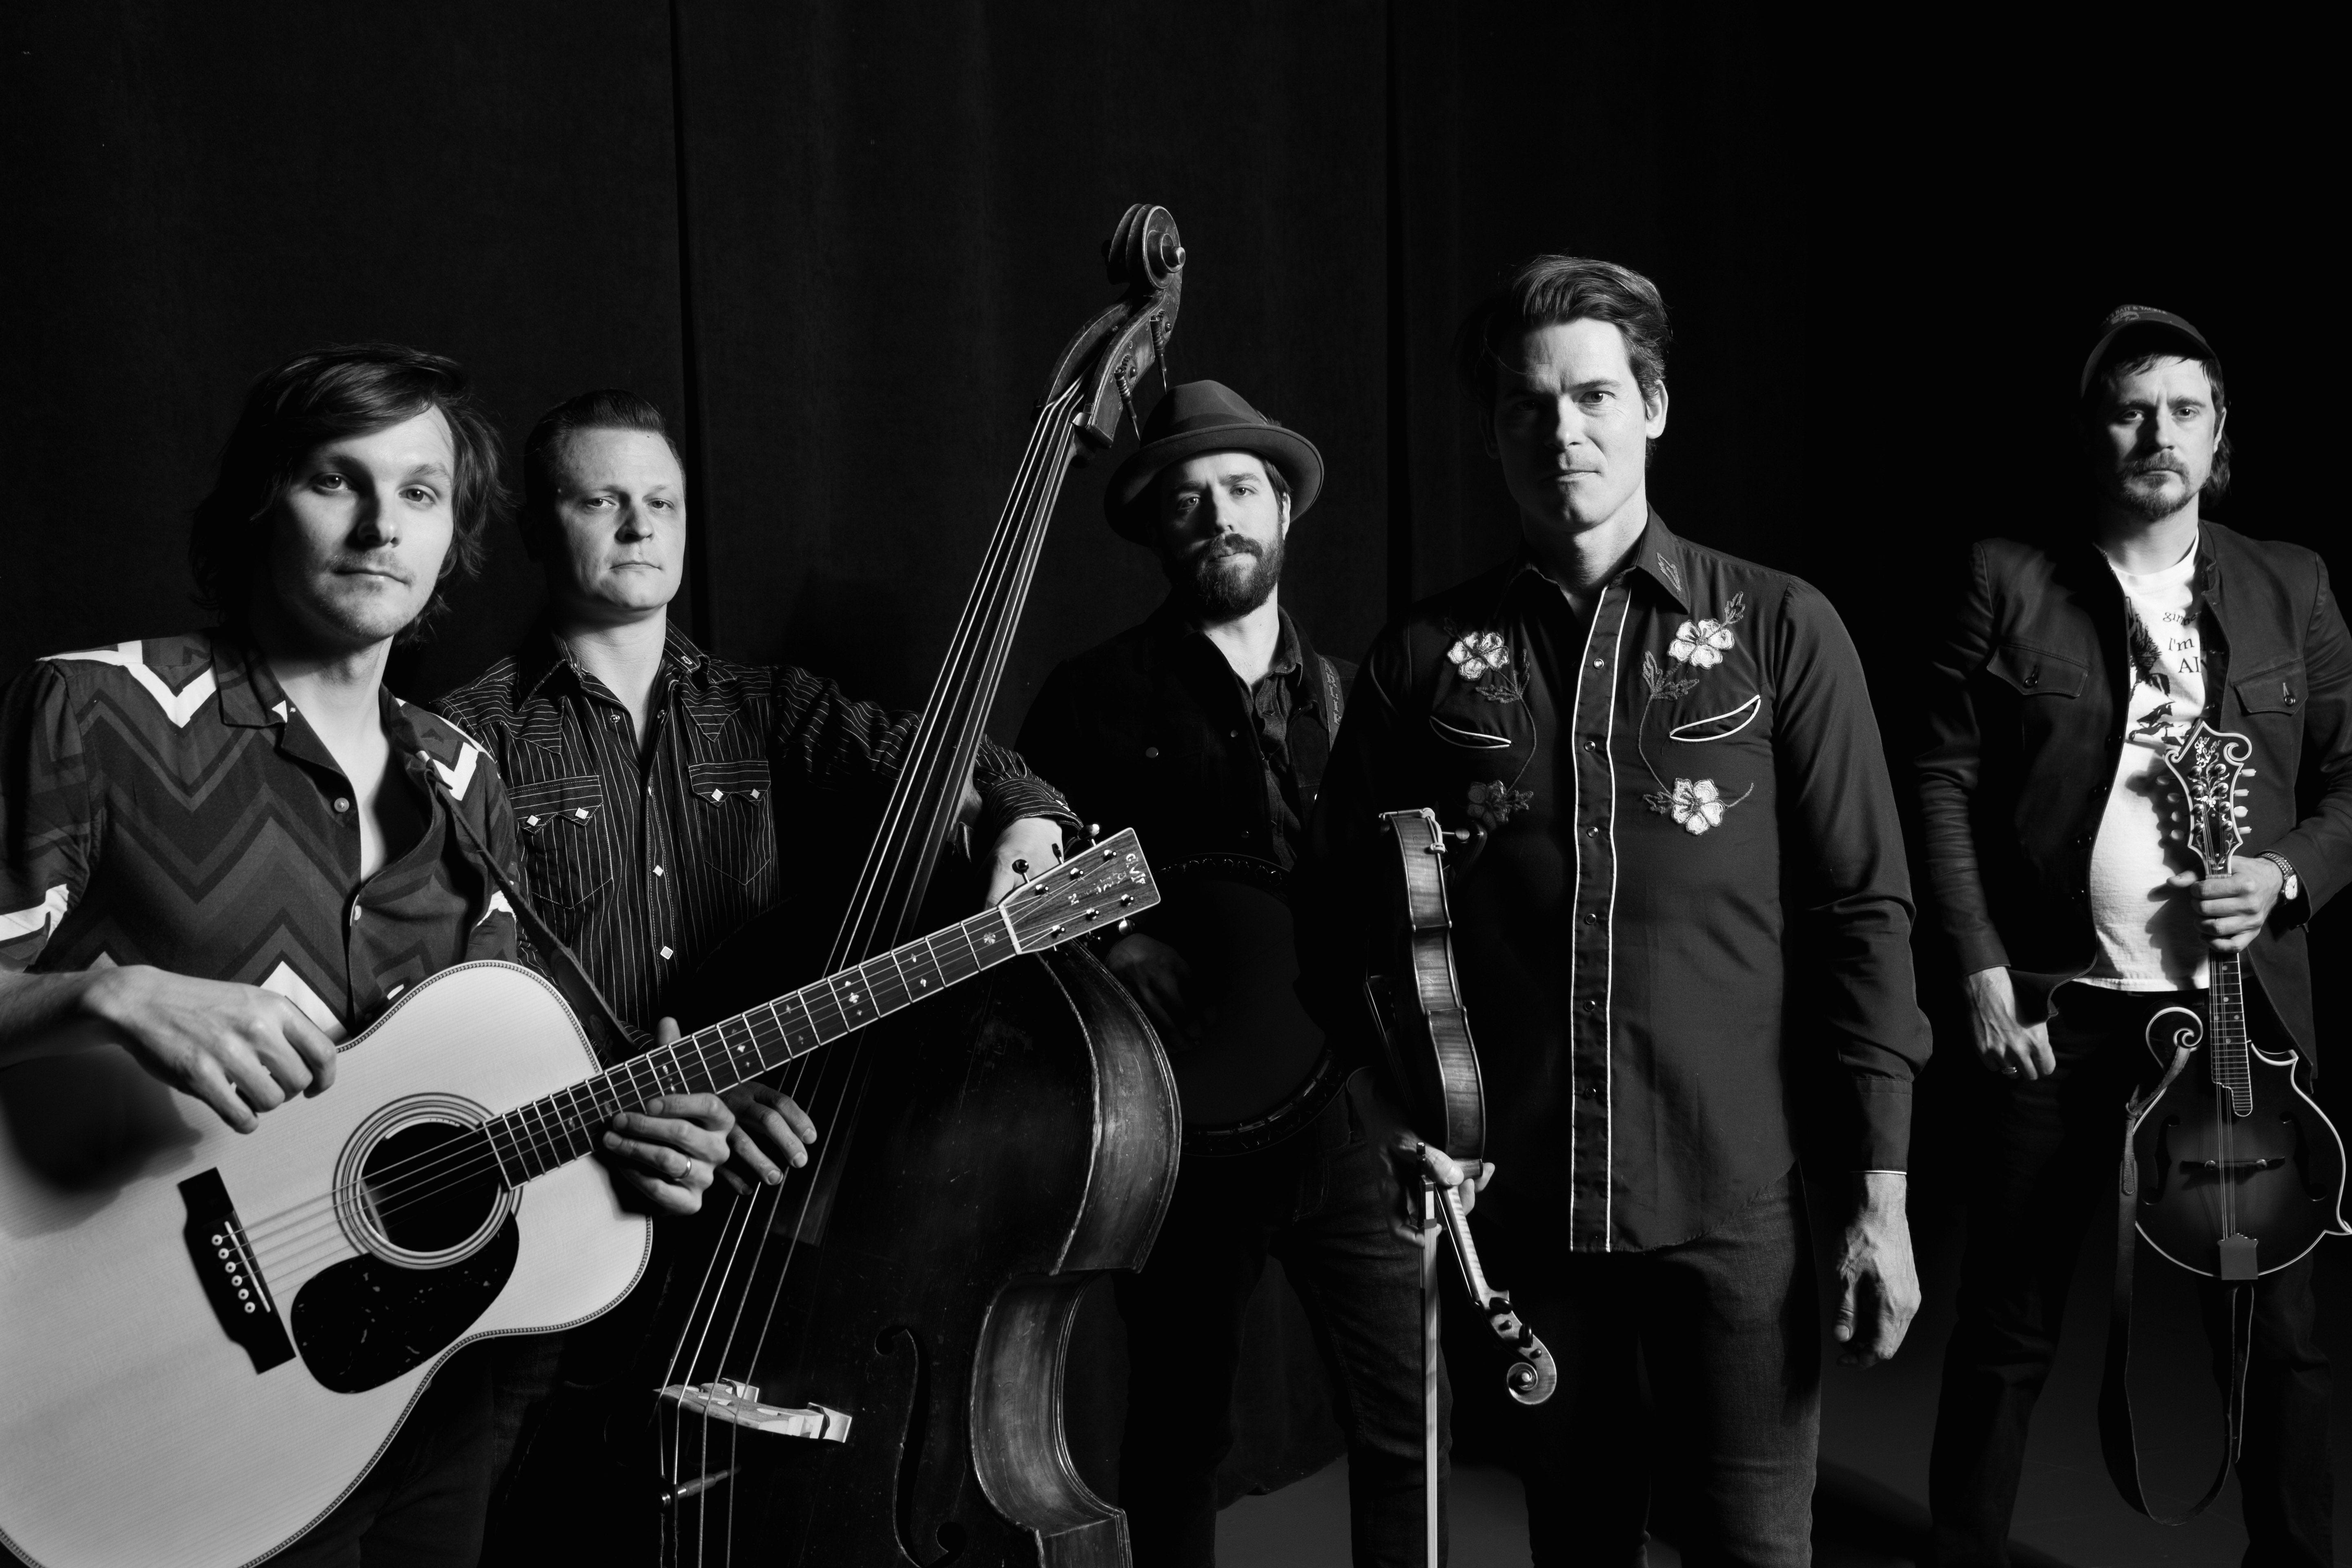 The Broadside Effect: An Interview With Old Crow Medicine Show’s Ketch Secor